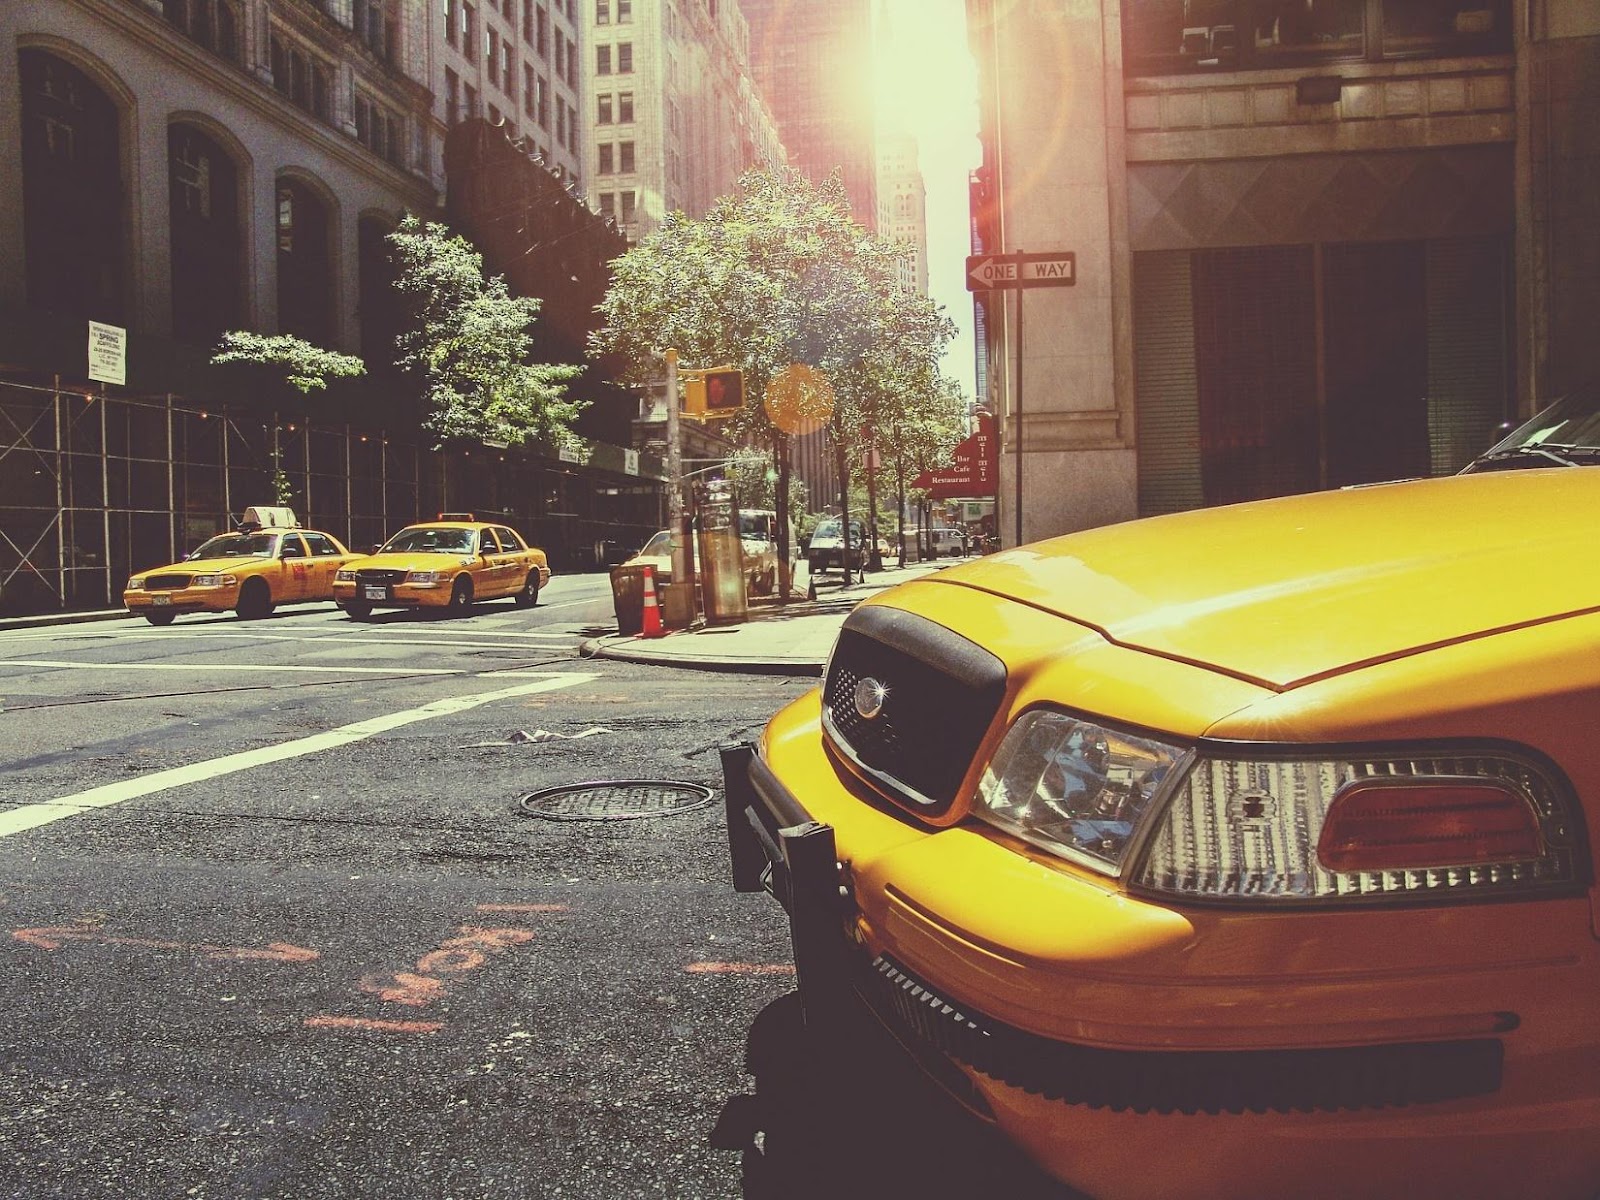 A picture containing outdoor, yellow, transport, orange

Description automatically generated